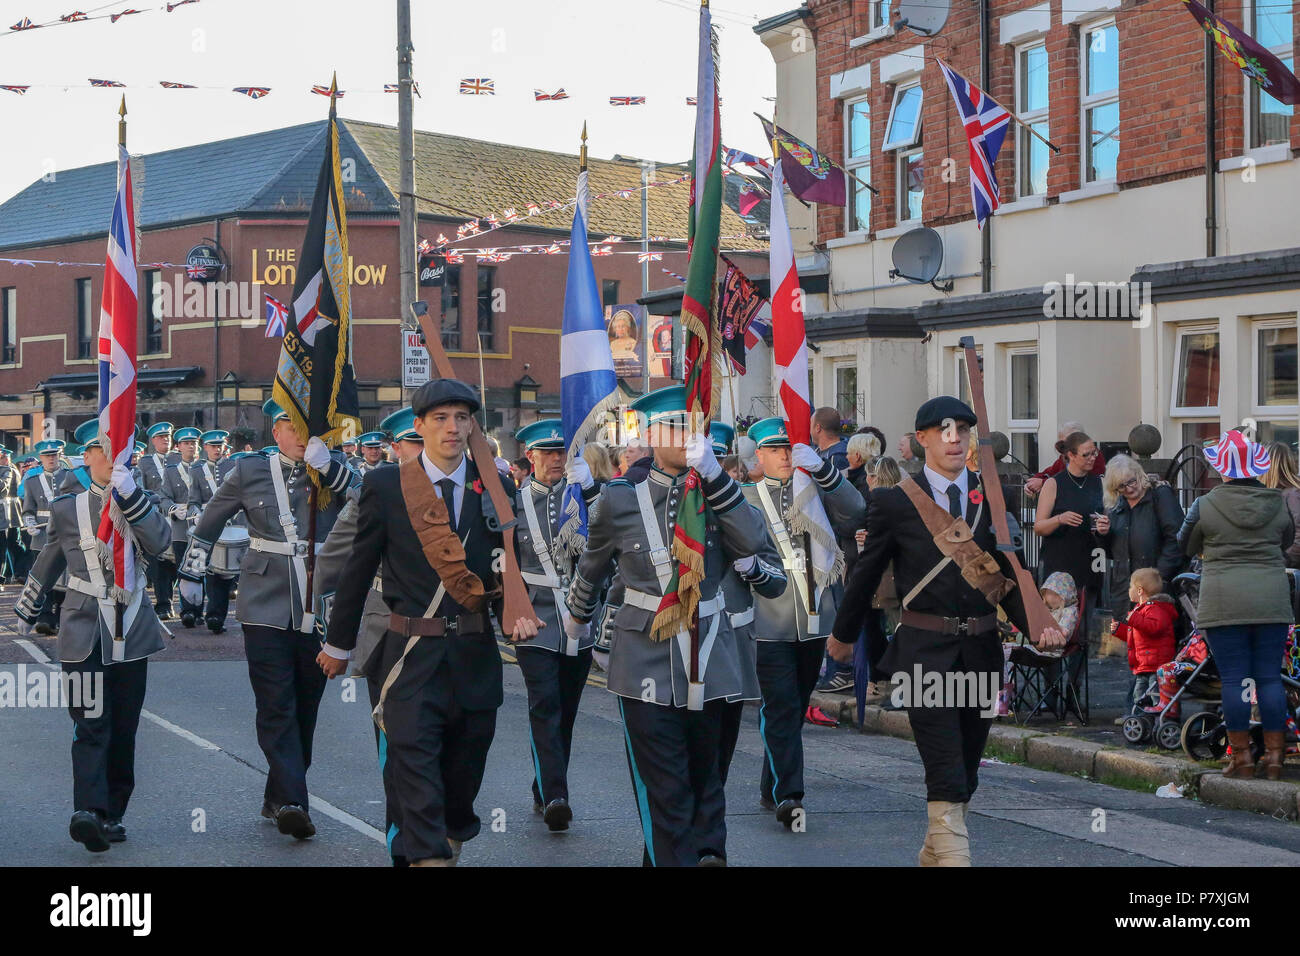 01 July 2016 – Orange Order Parade in Belfast marking the anniversary of the battle of the Somme. This is the Ballymacarrett and No 6 District Parade in east Belfast. Each year throughout Northern Ireland the Orange Order hold a number of parades and church services to mark the anniversary of the Battle of the Somme given its immense impact back then on the province  - lodges and bands parade watched by large crowds each year. Stock Photo